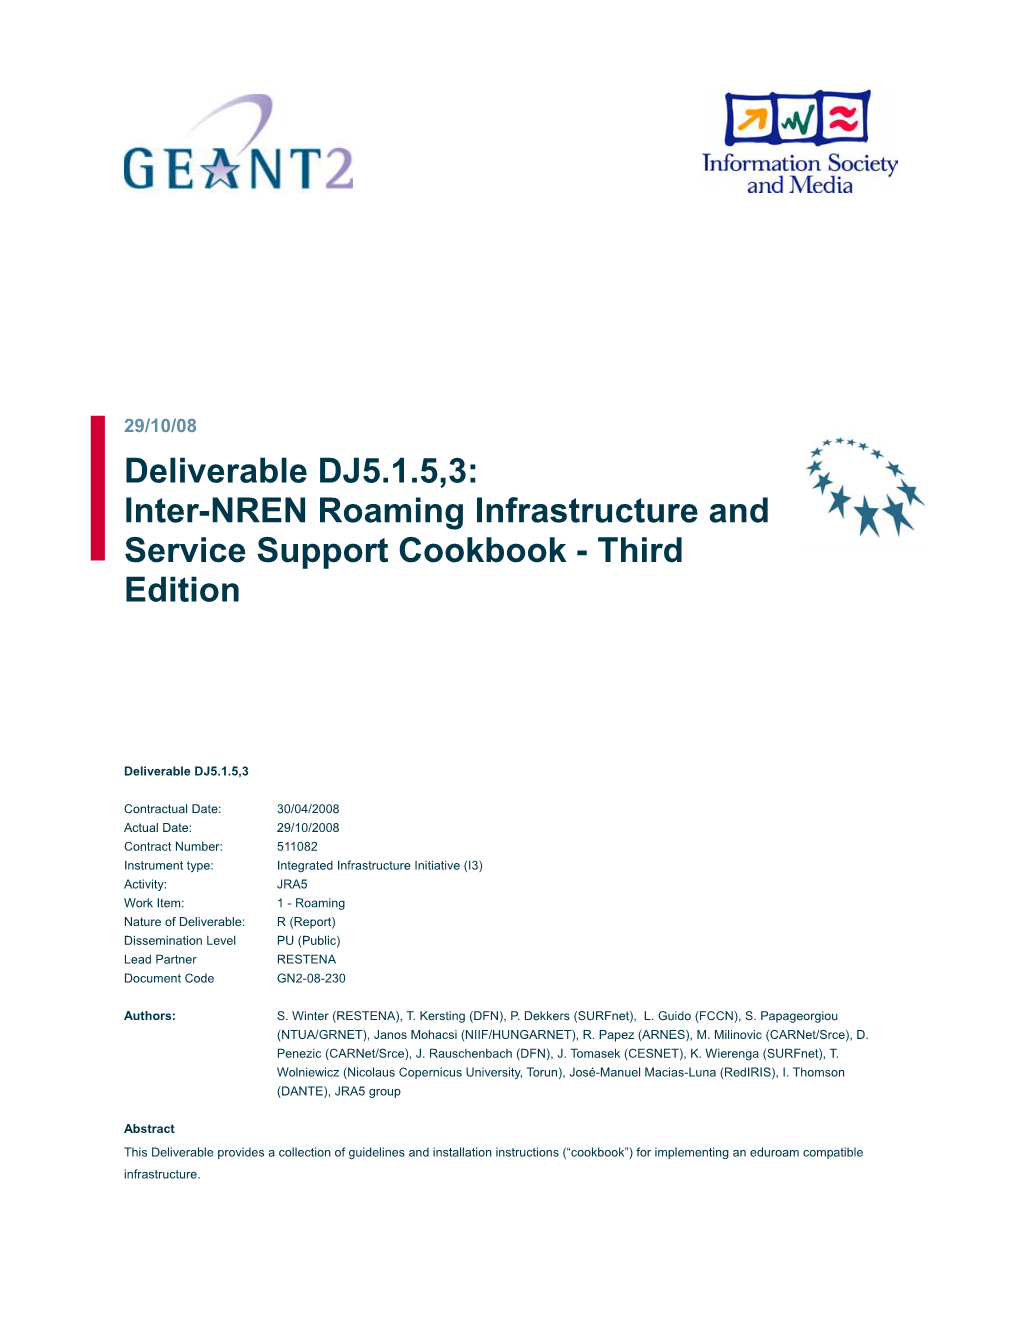 Deliverable DJ5.1.5,3: Inter-NREN Roaming Infrastructure and Service Support Cookbook - Third Edition